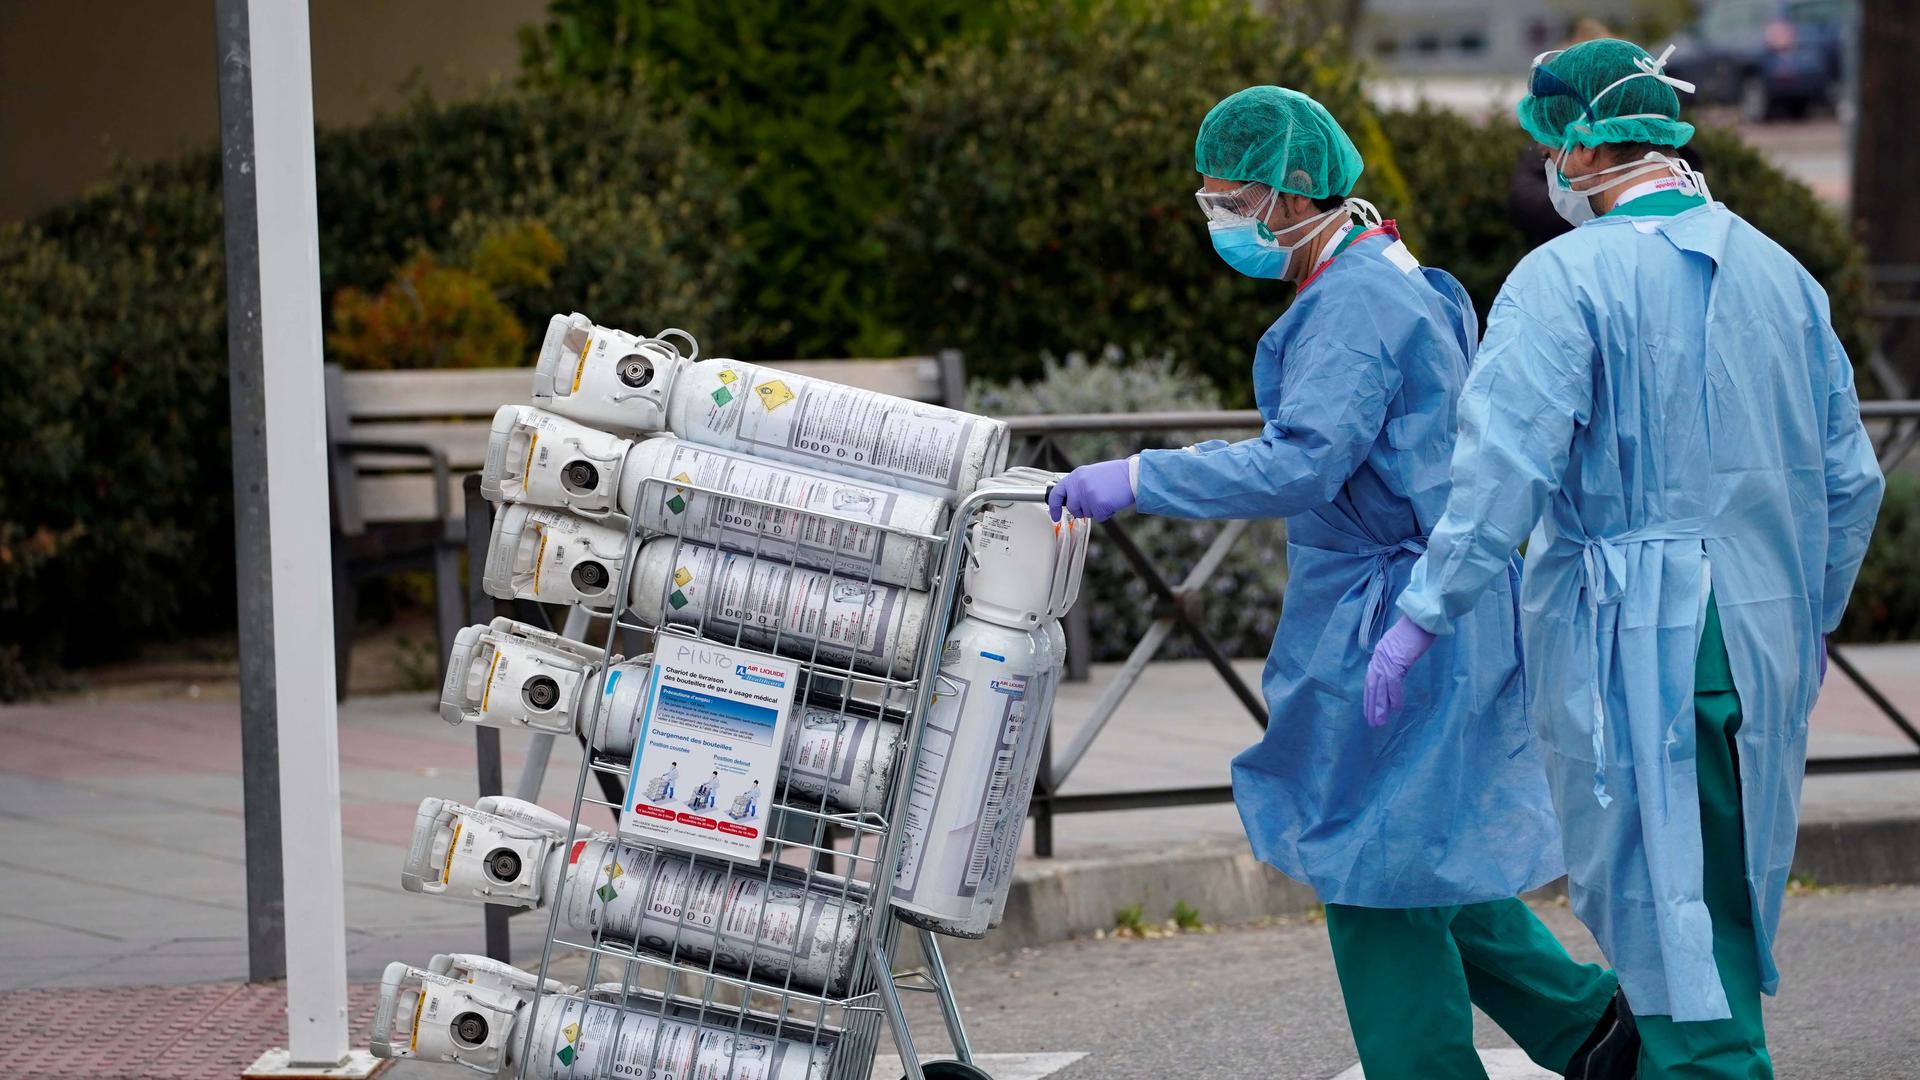 Healthcare workers wearing protective face masks bring oxygen bottles to the emergency unit at 12 de Octubre Hospital, amid the coronavirus disease (COVID-19) outbreak in Madrid, Spain March 30, 2020.